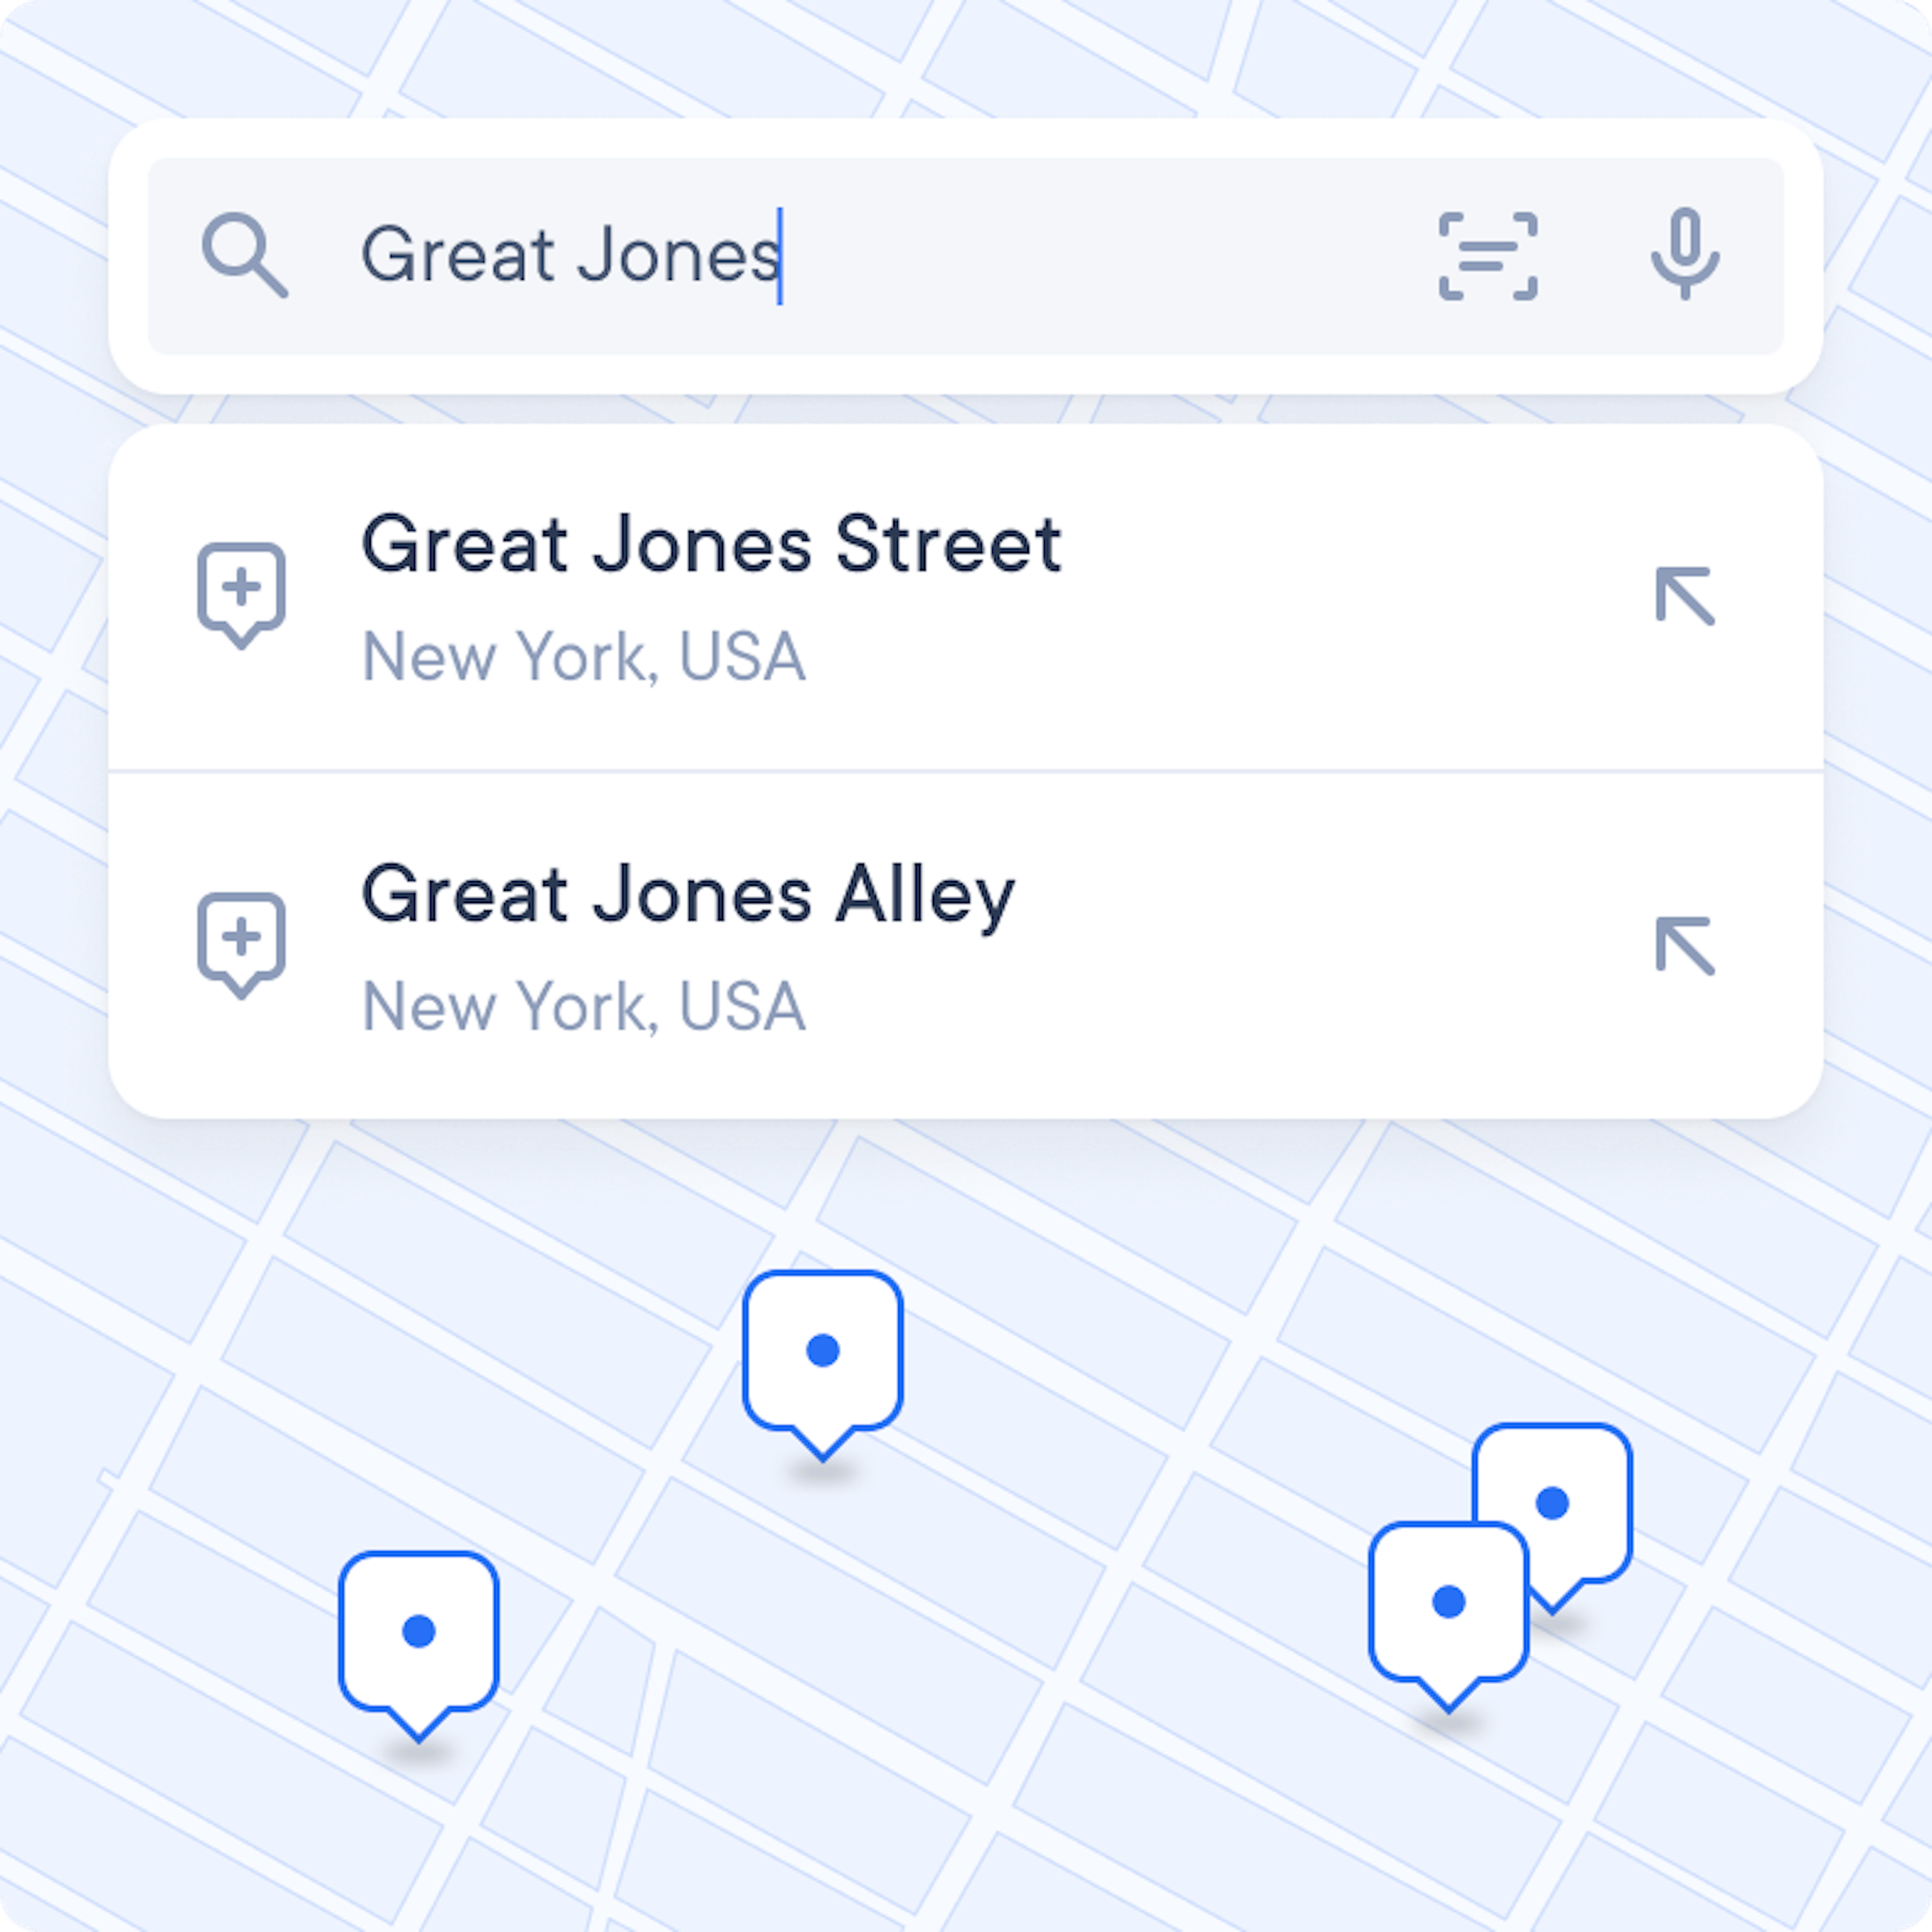 Map with delivery stops, address search menu with icons for address scanning and voice search